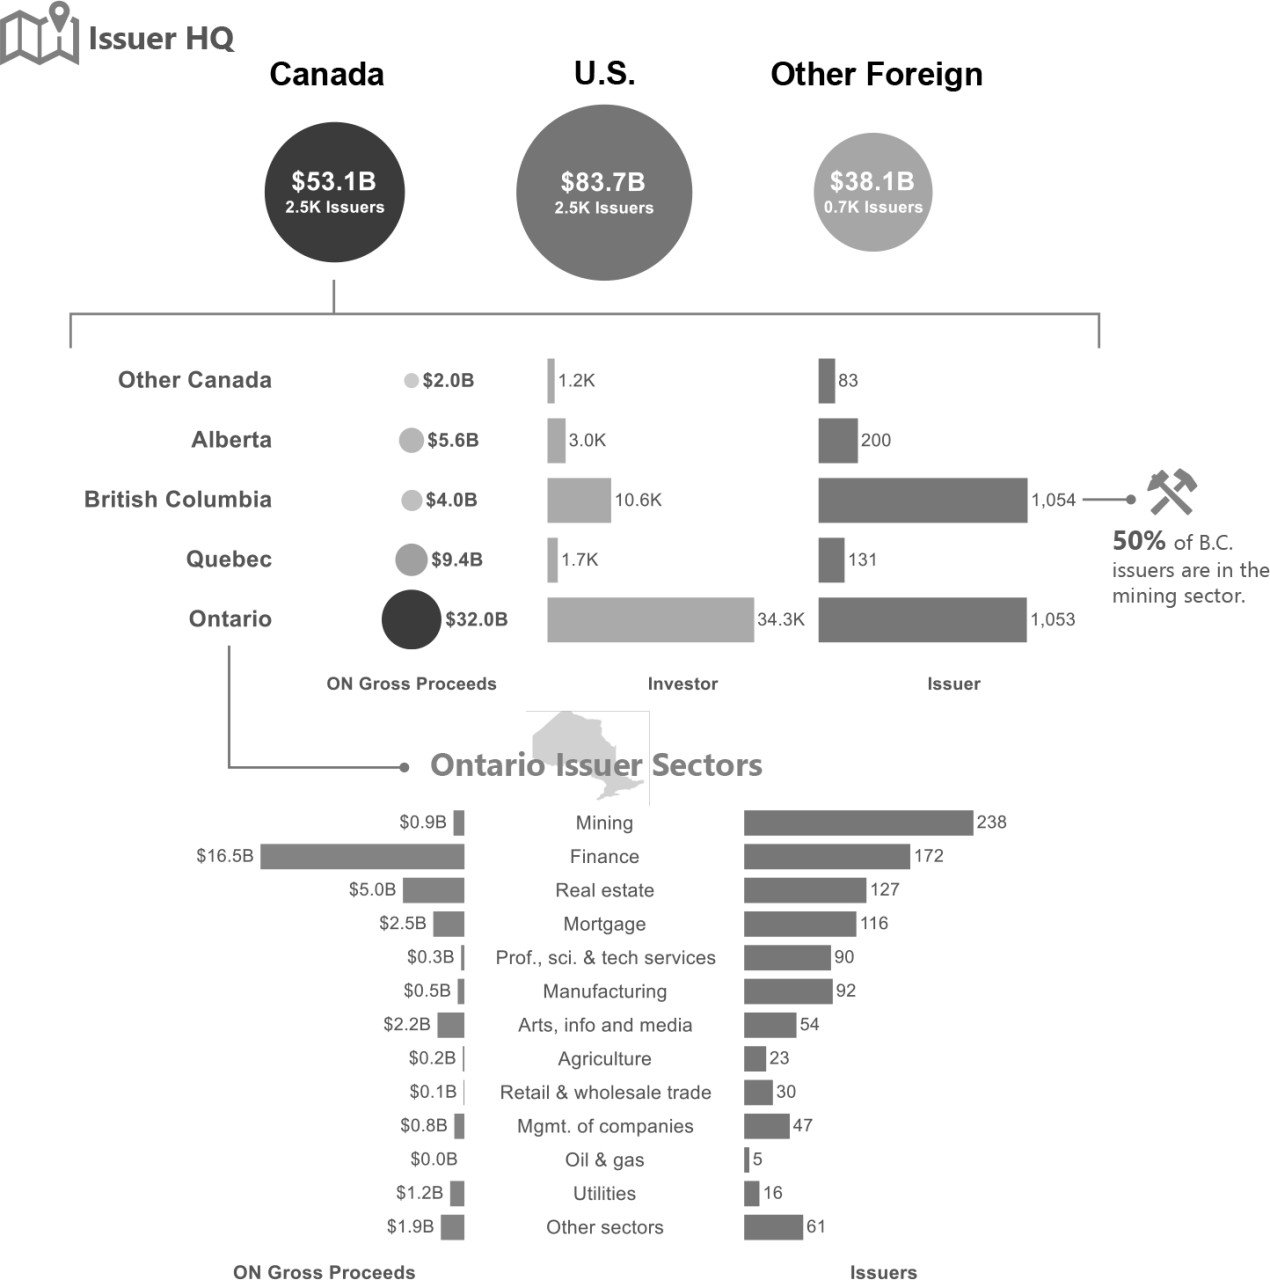 Top section of infographic shows amounts raised and number of issuers from Canada, U.S., and other foreign countries. There are about 2,500 Canadian issuers and raised about $53.1B. There are about 2,500 U.S. issuers and raised $83.7B. And there are about 700 issuers from other foreign countries and raised $38.1B.  Middle section shows amount of gross proceeds raised from Ontario investors, number of investors, and number of issuers by Canadian issuers' headquarter province. Ontario and BC comprise the majority of issuers.  Bottom section: for Ontario issuers only, the bar charts show the distribution of gross proceeds raised and number of issuers across key sectors. 